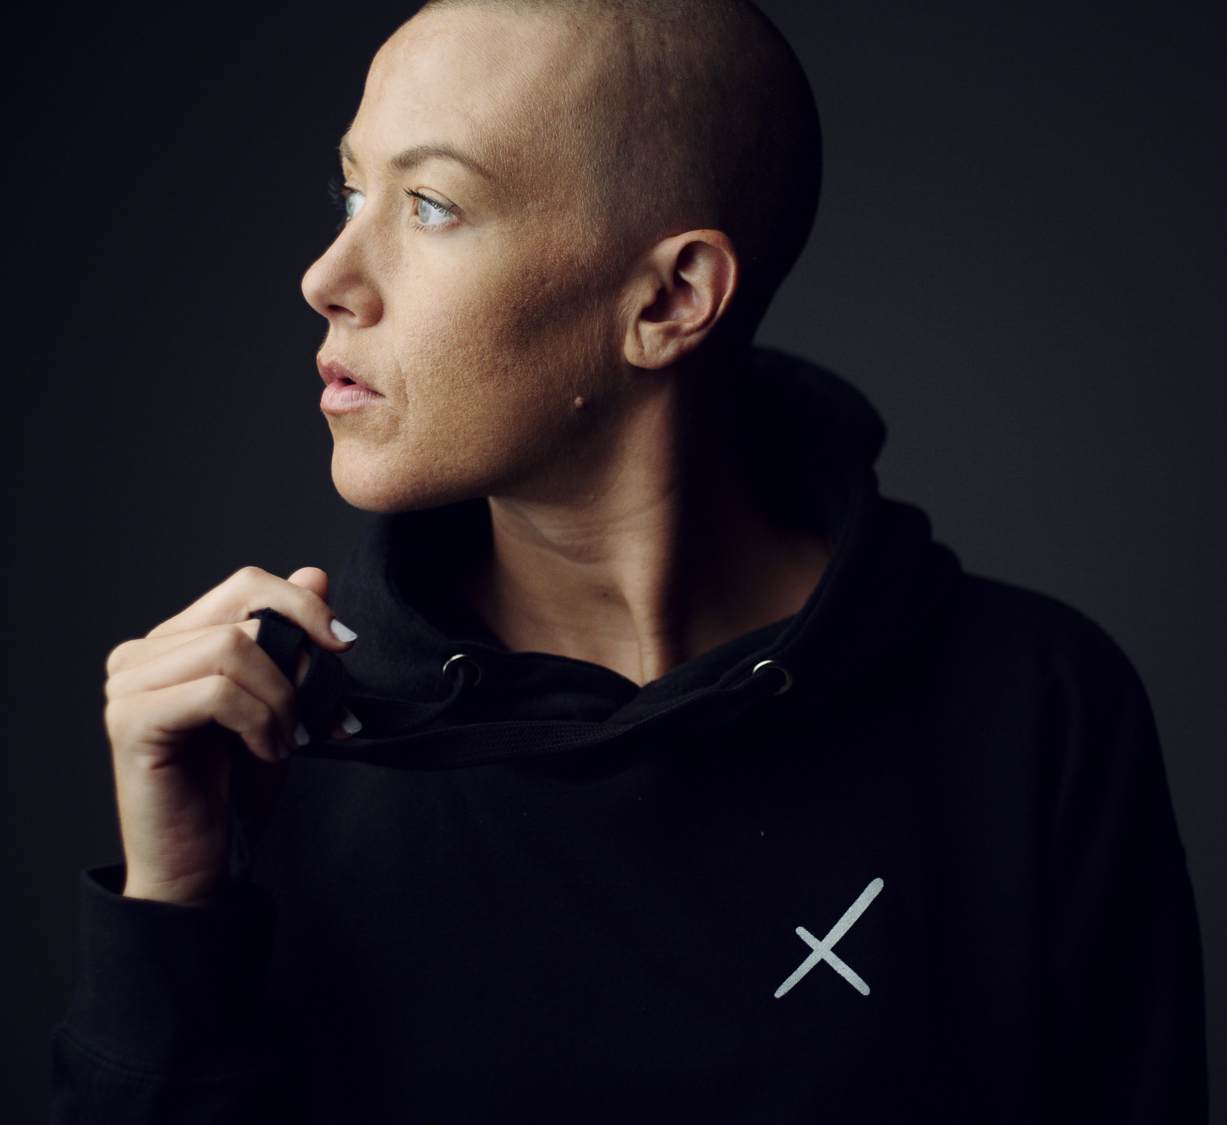 Headshot of female model with shaved head looking off to the side wearing black jacket with white Uncreative logo